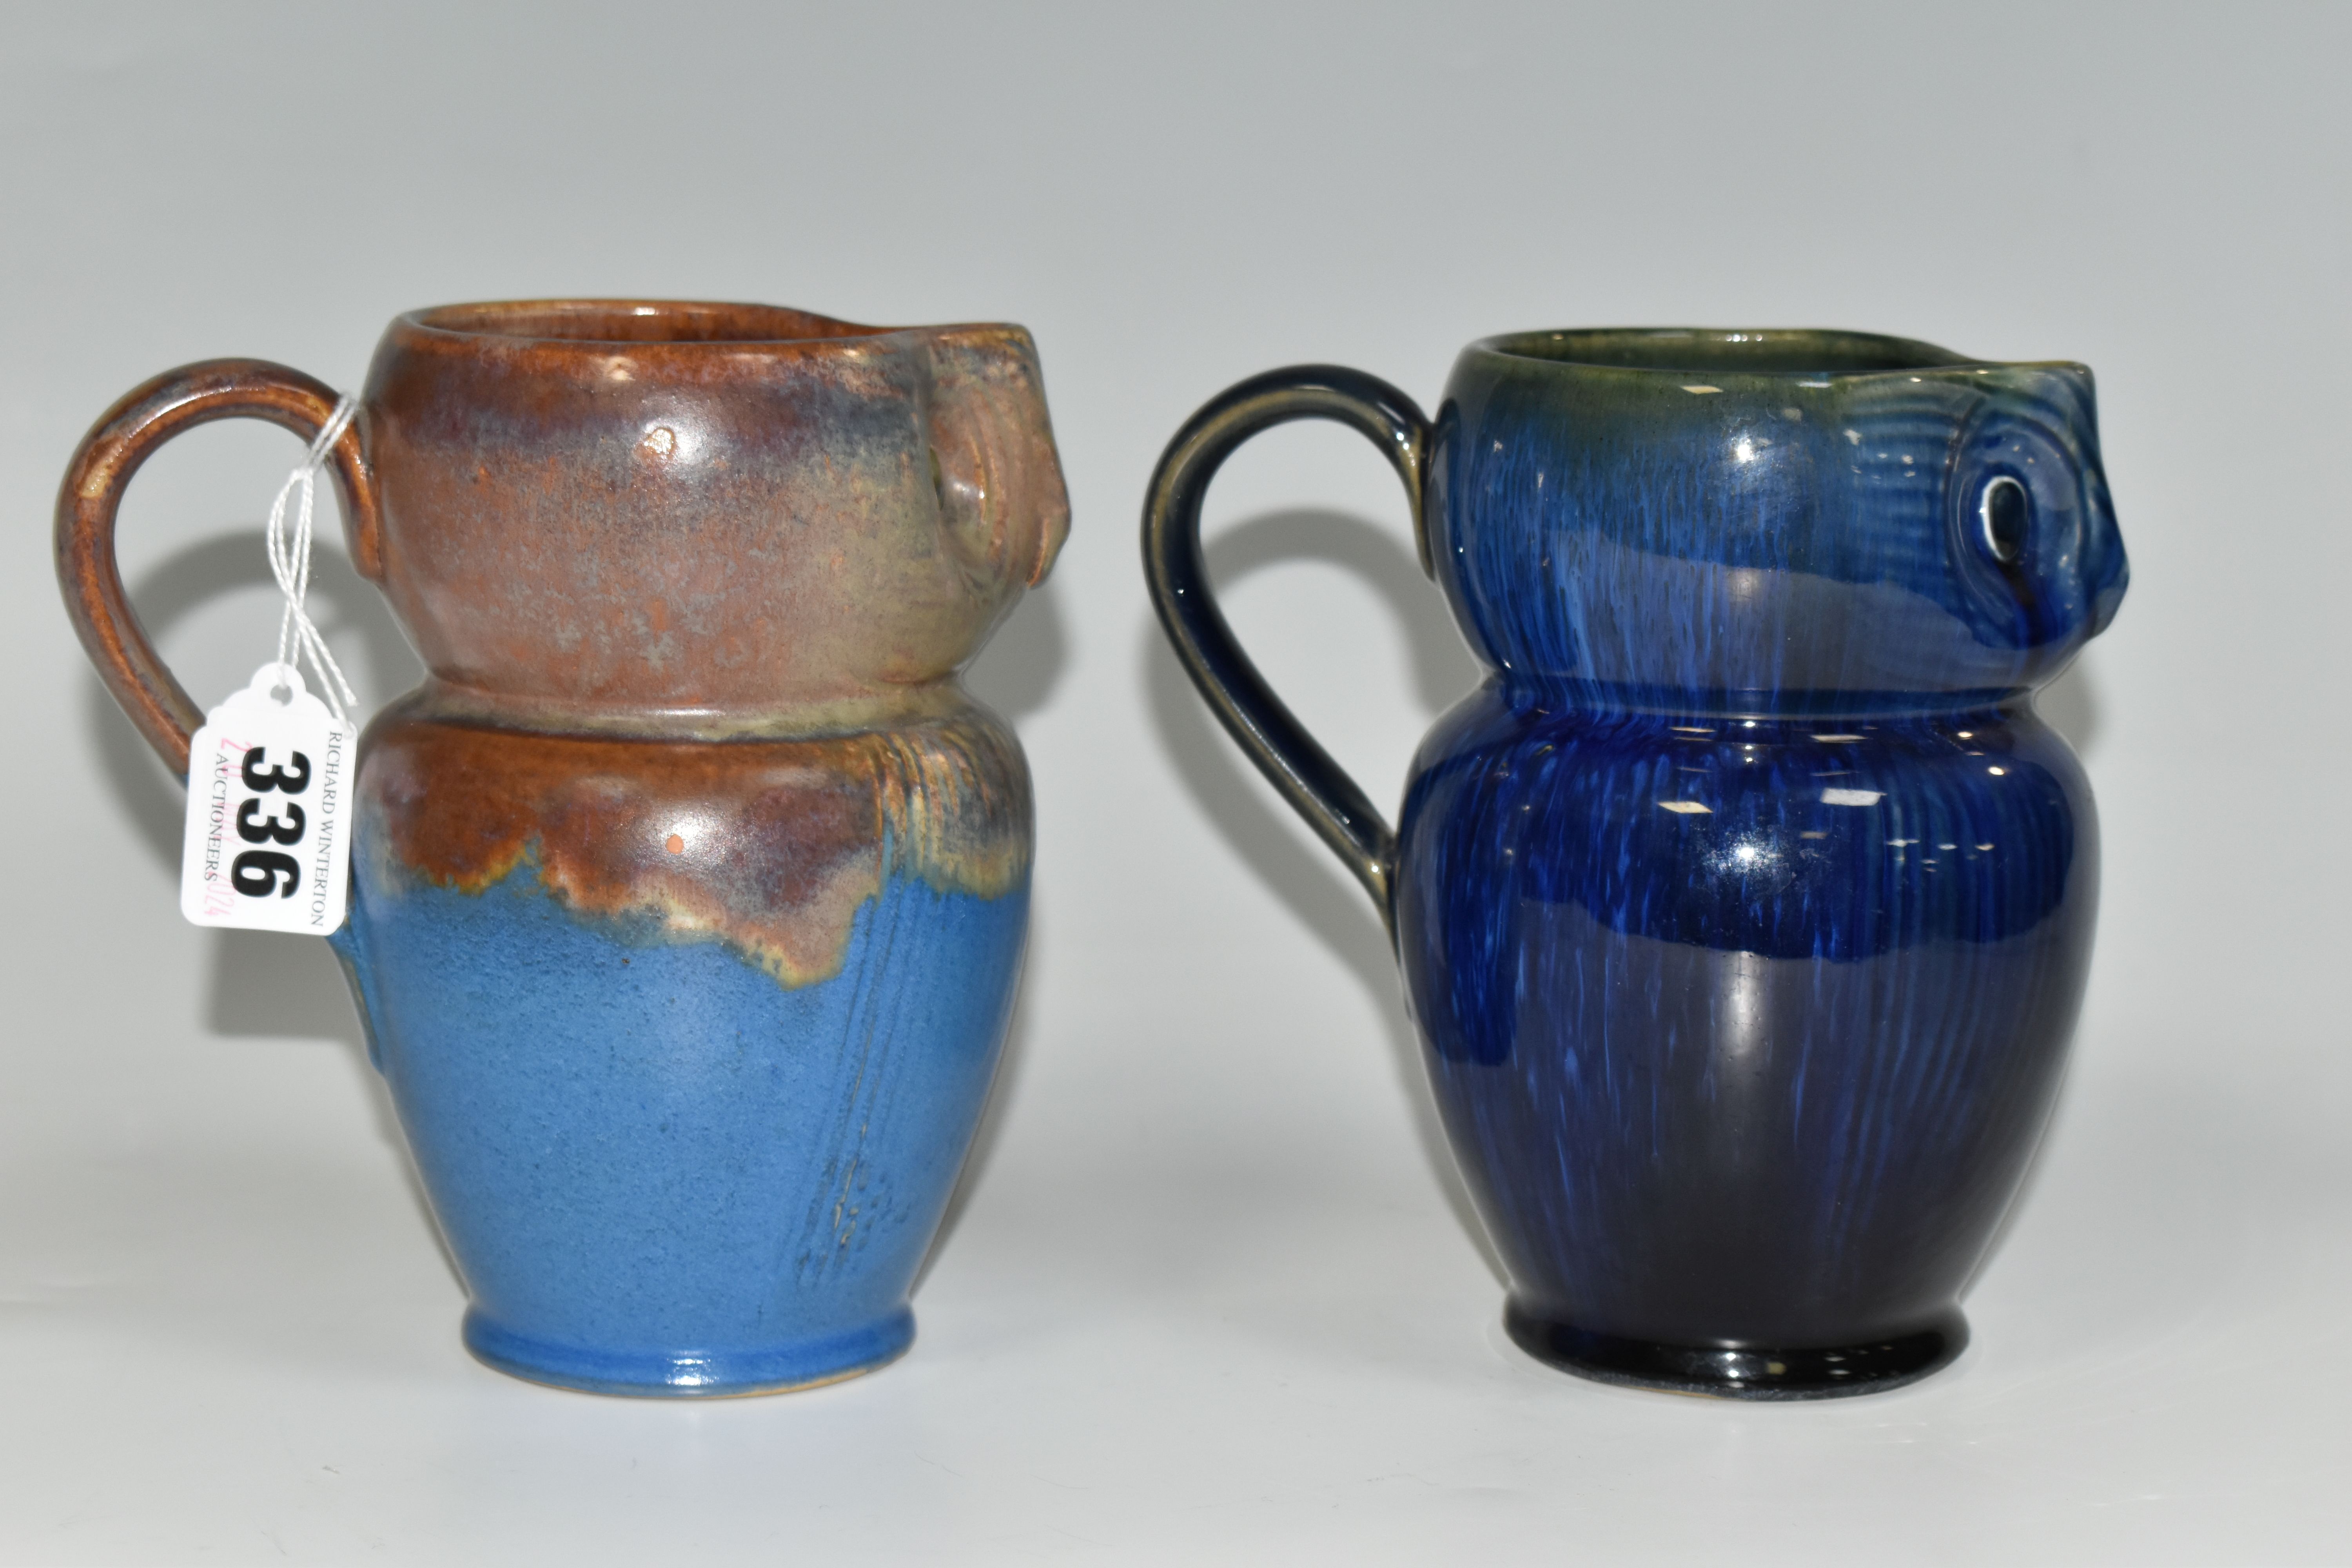 TWO BOURNE DENBY OWL JUGS, 1920s-1930s Danesby Ware, one with mid blue and brown glaze, the other - Image 4 of 6